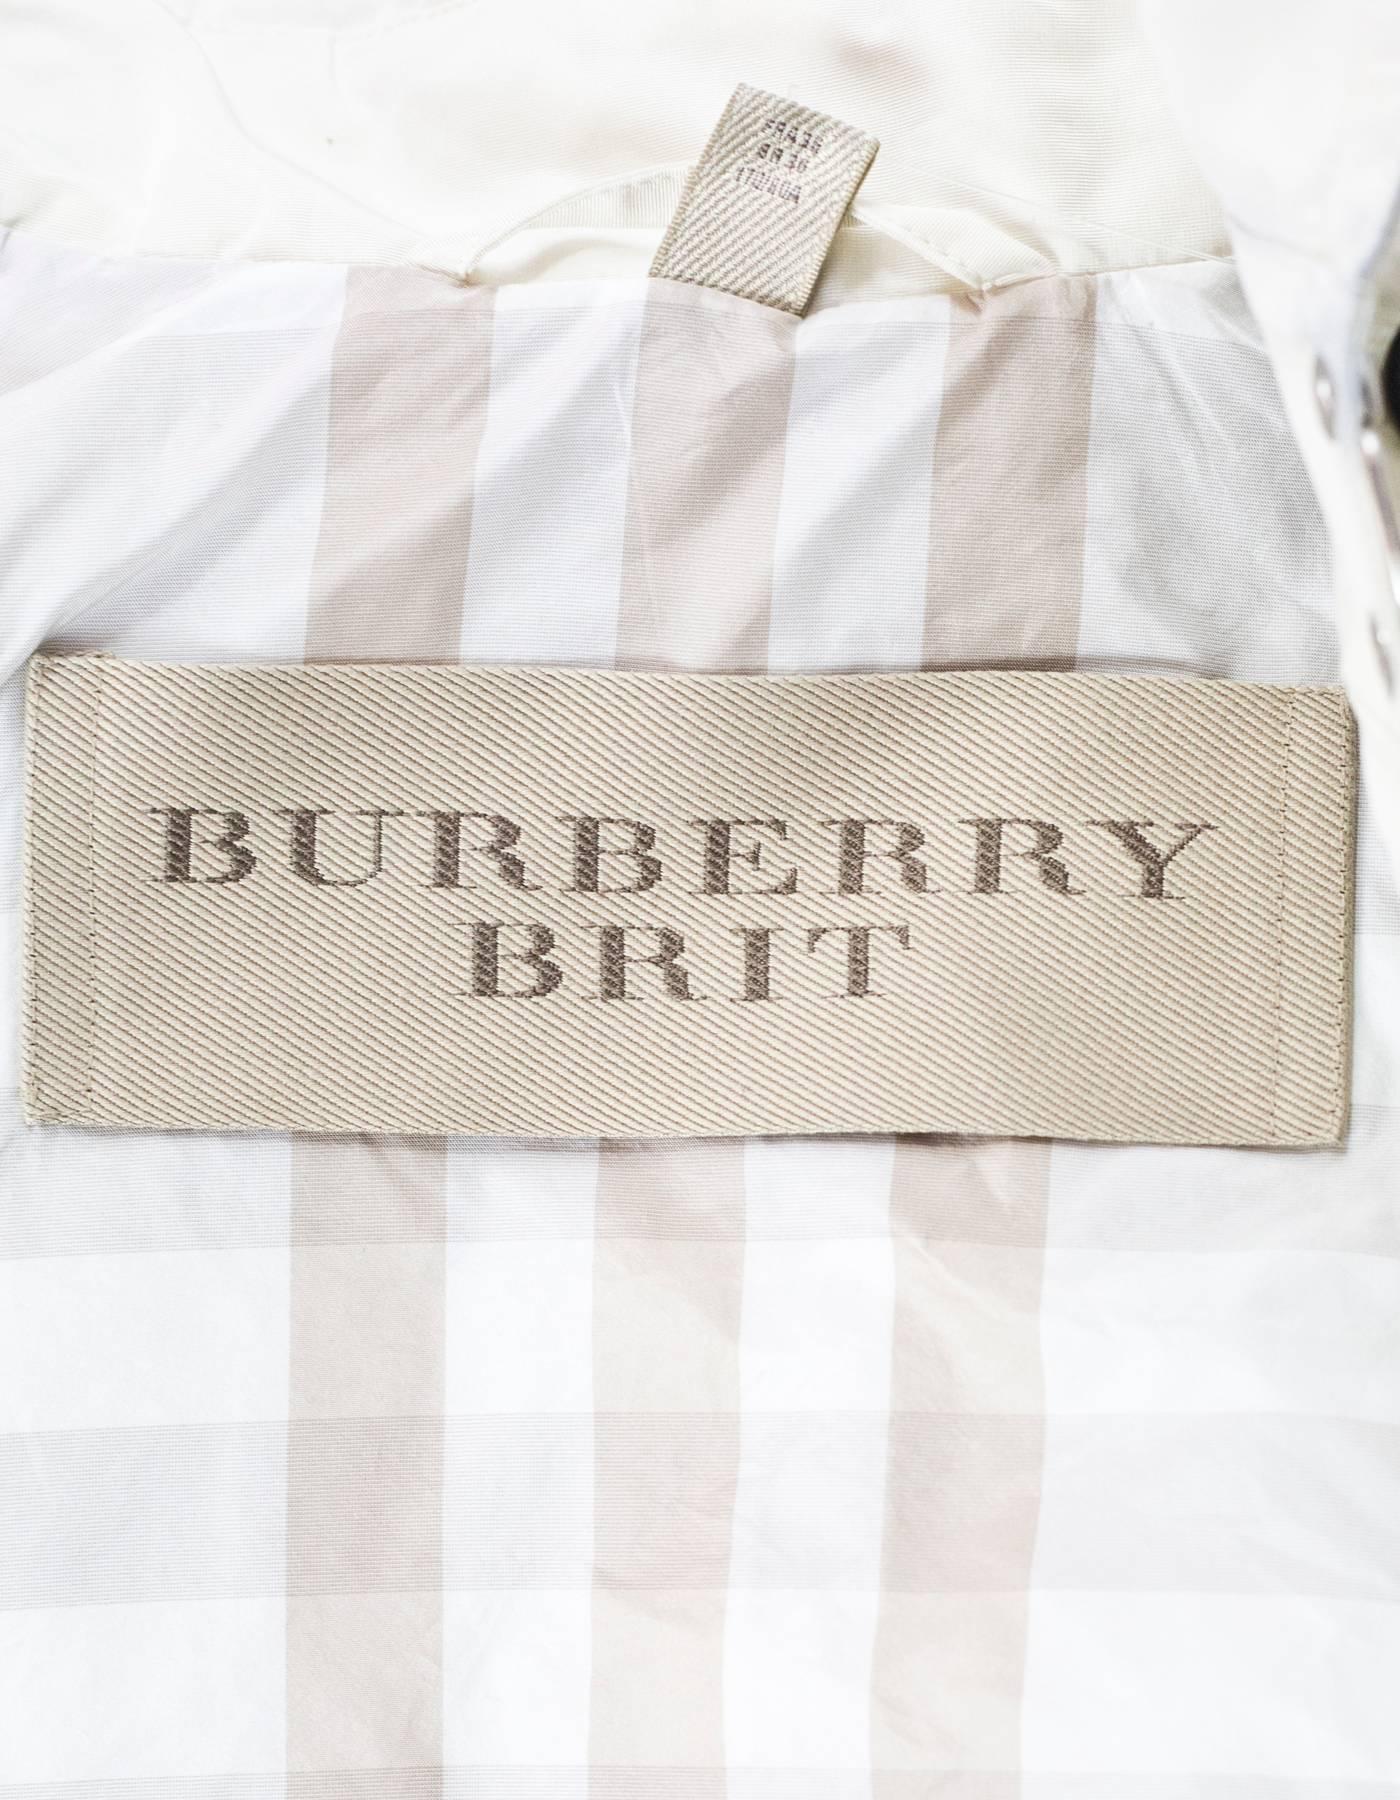 Burberry Brit Cream Knightsdale Hooded Trench Coat Sz 4 1